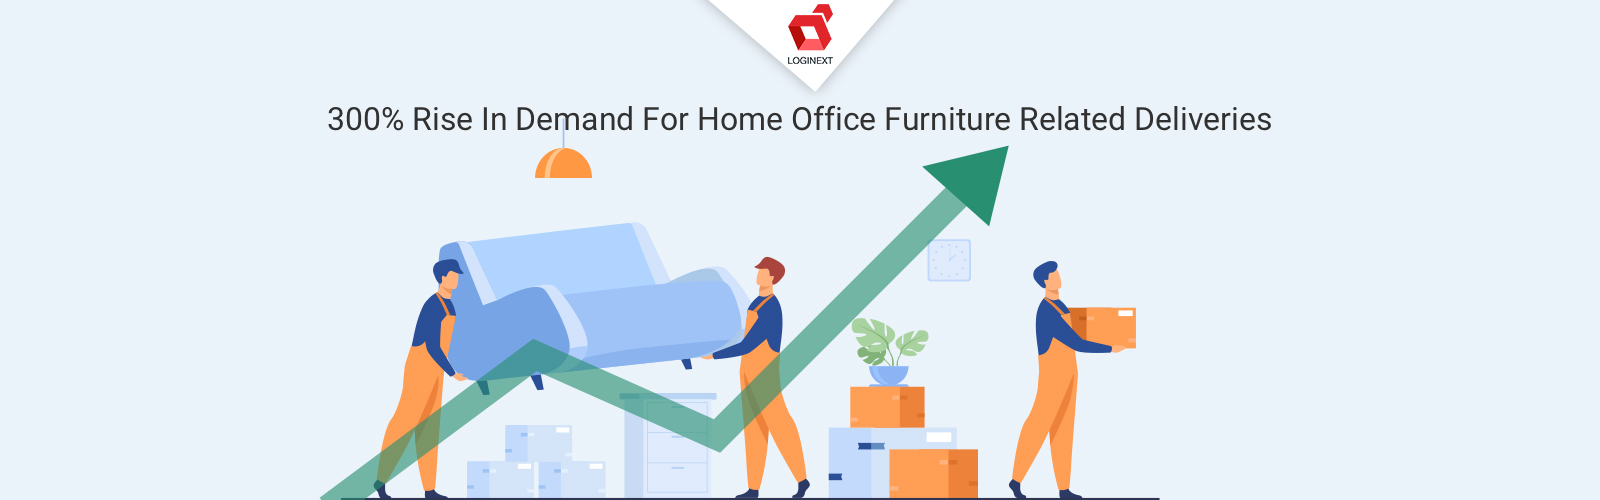 LogiNext witnesses 300% rise in demand for home office furniture related deliveries